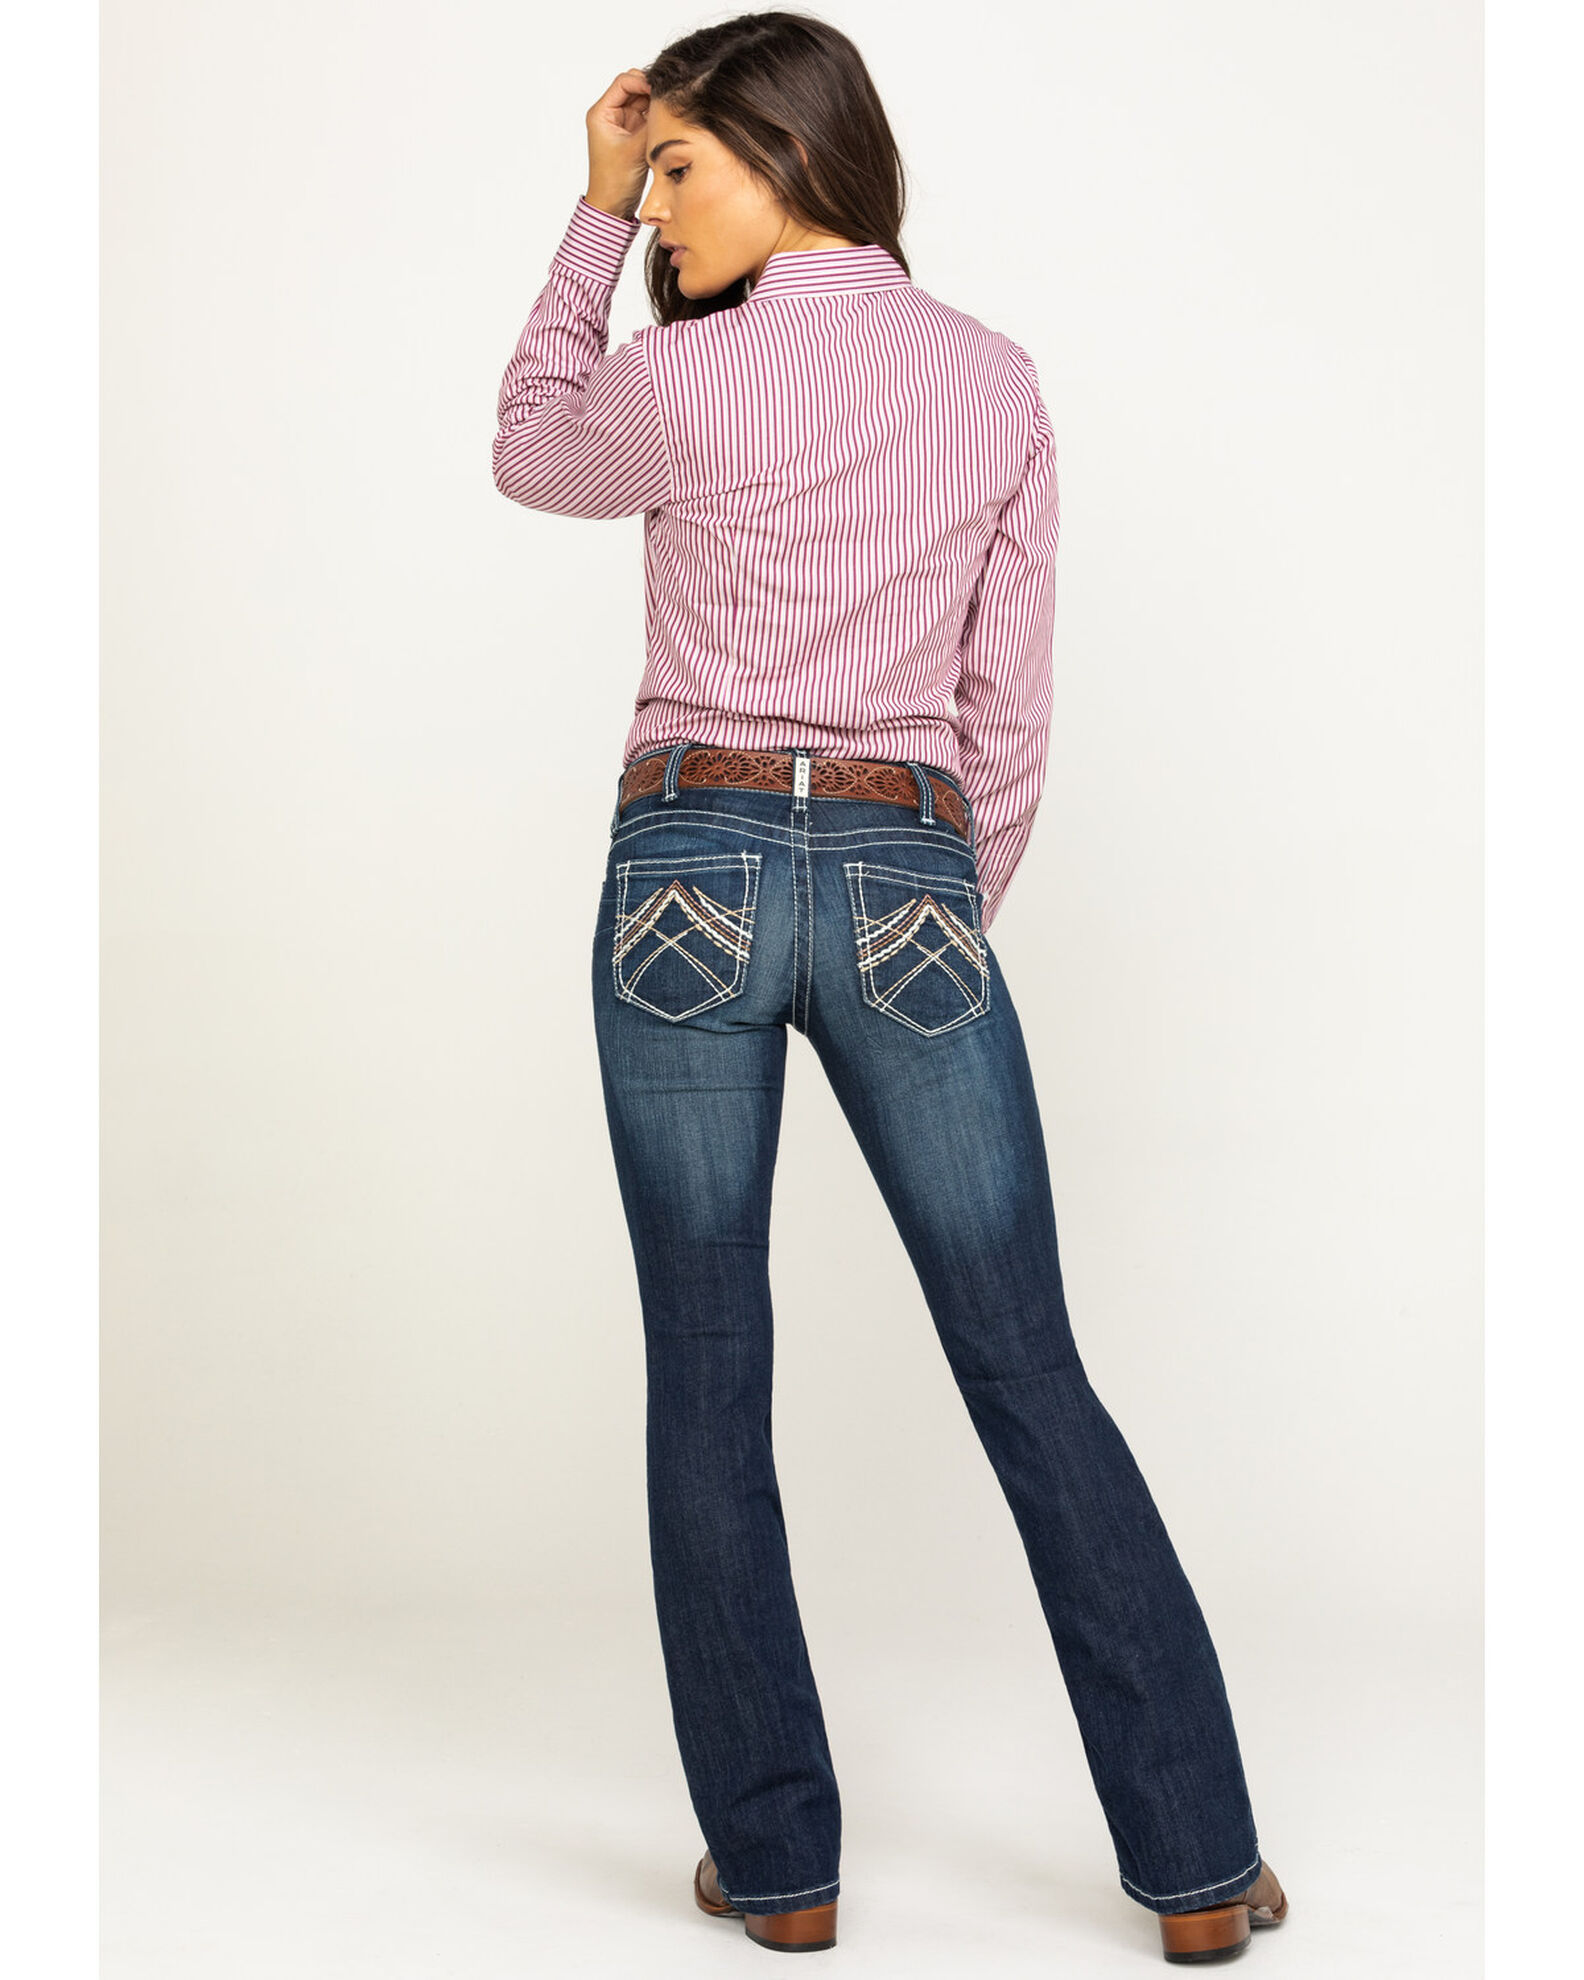 Product Name: Ariat Women's Rosy Whipstitch Boot Cut Jeans